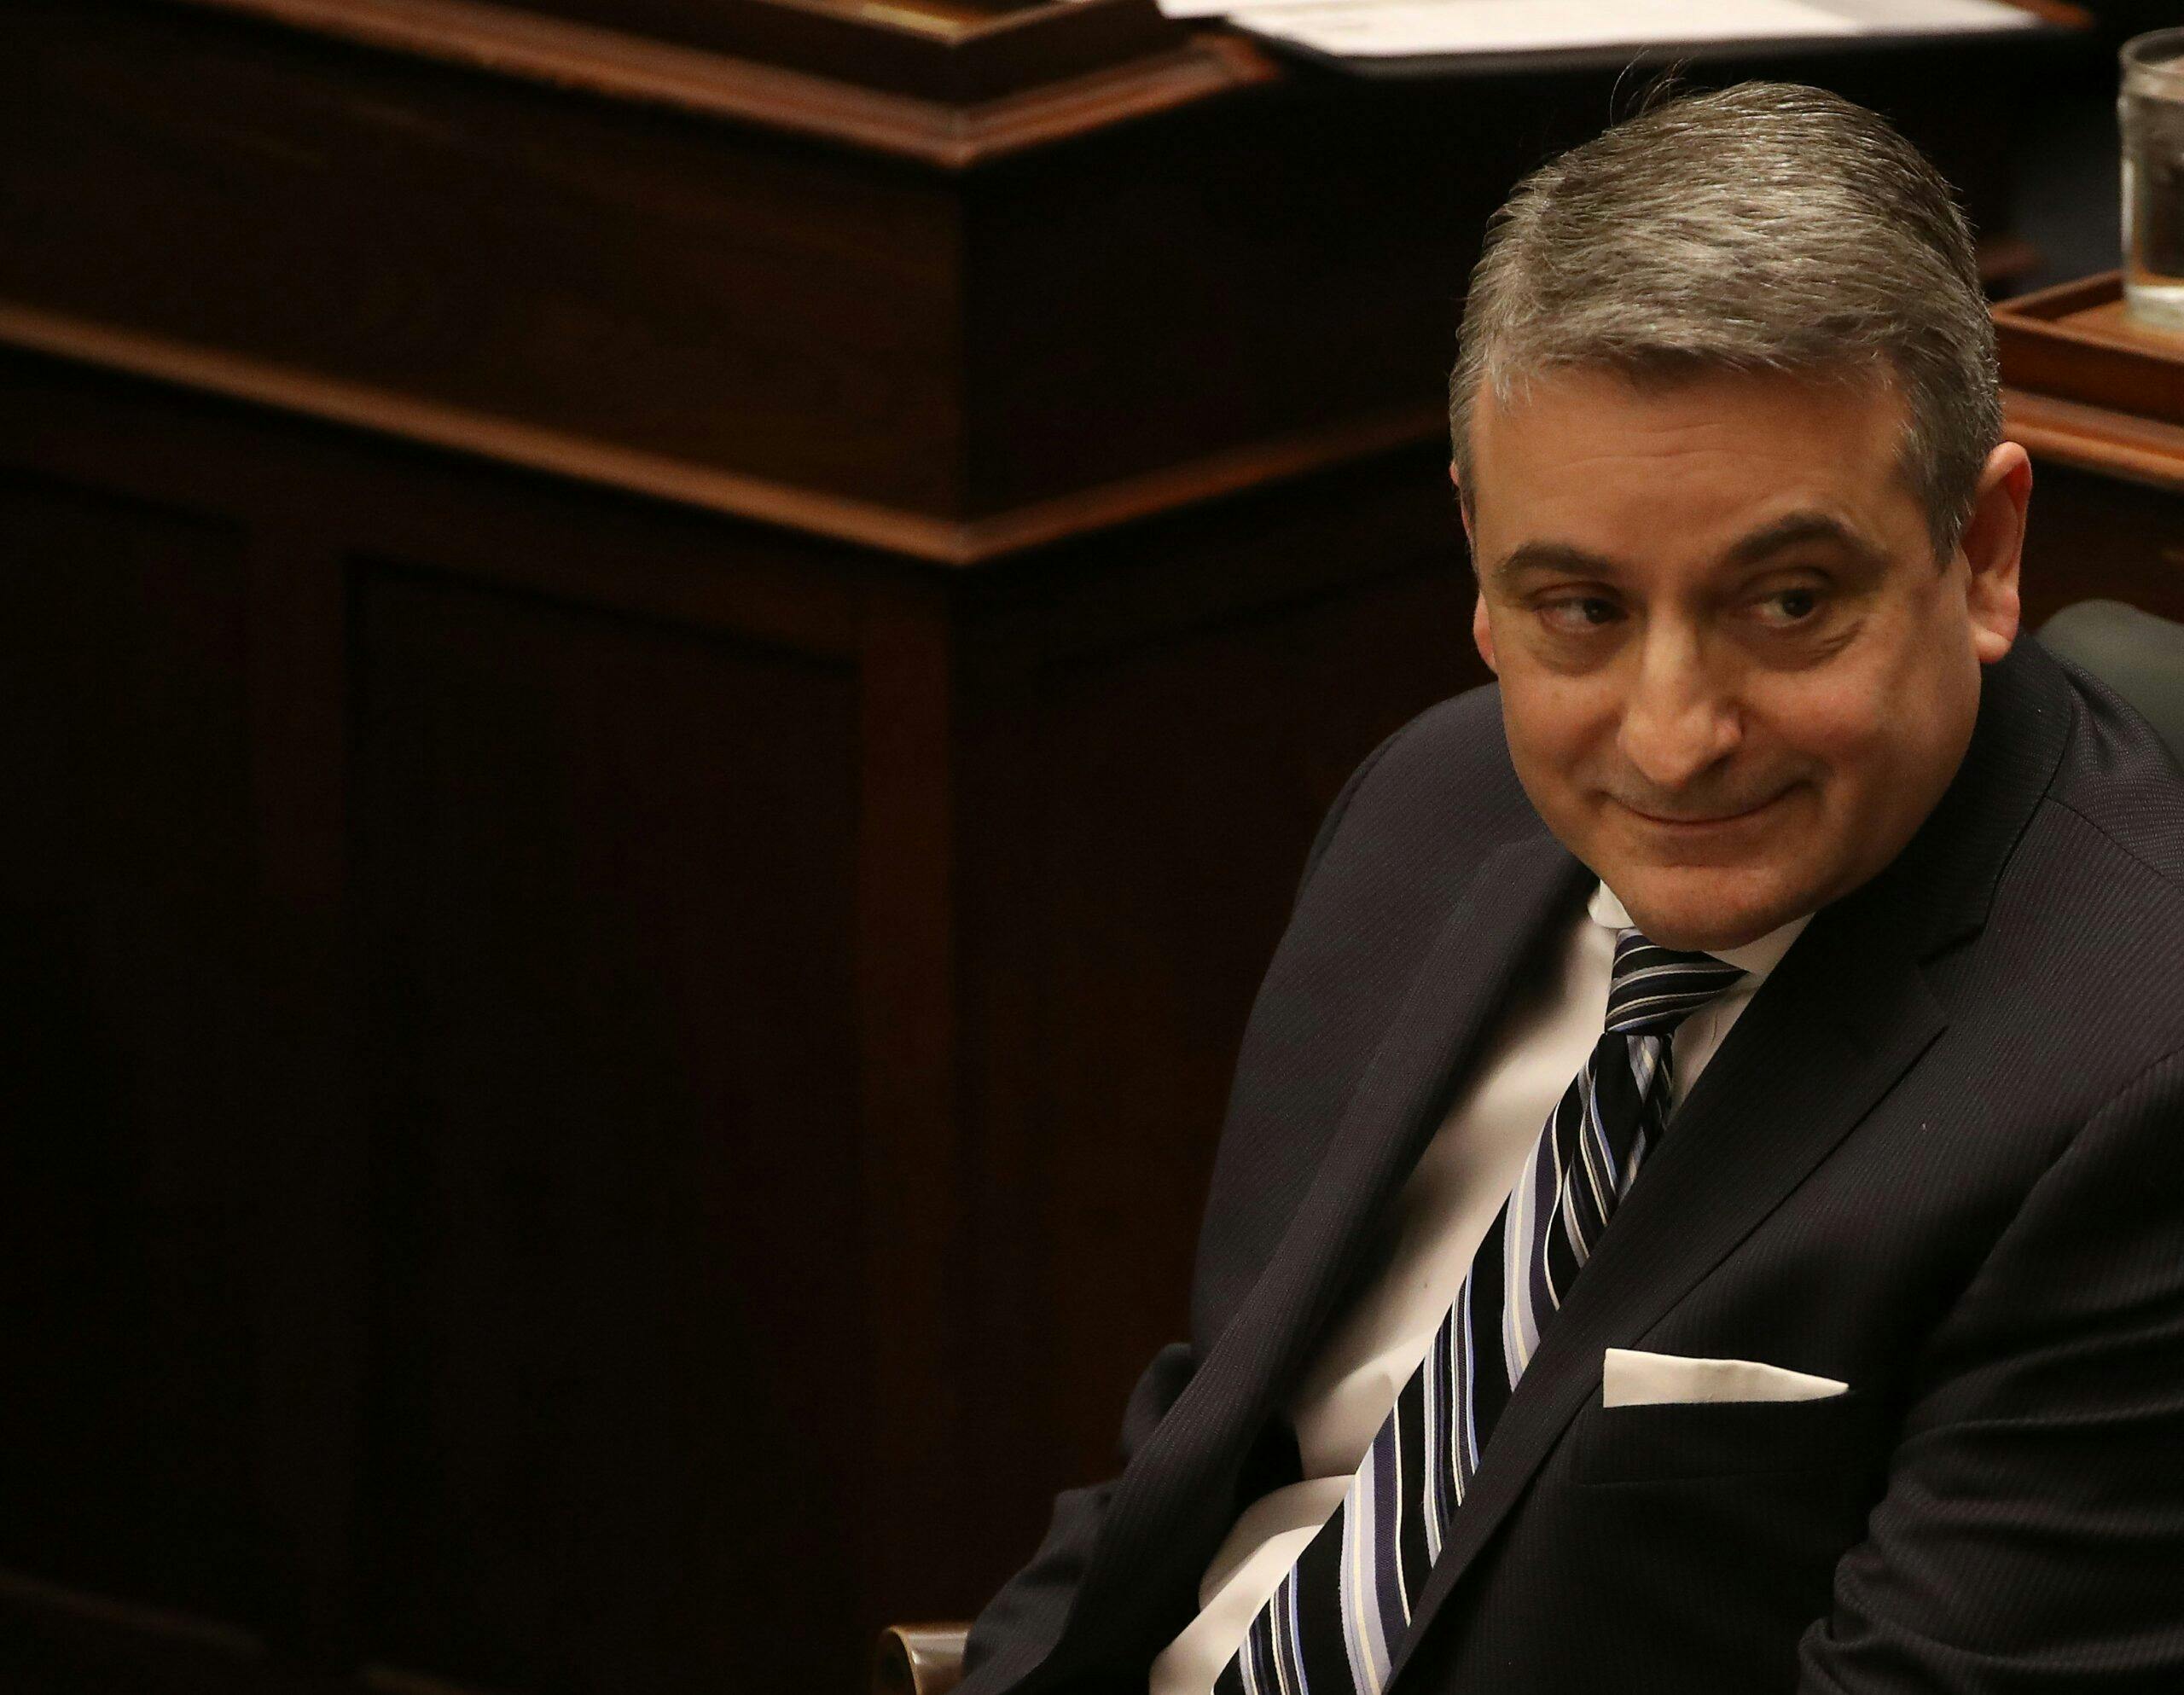 ‘Authority of the state will ultimately prevail’: Calandra